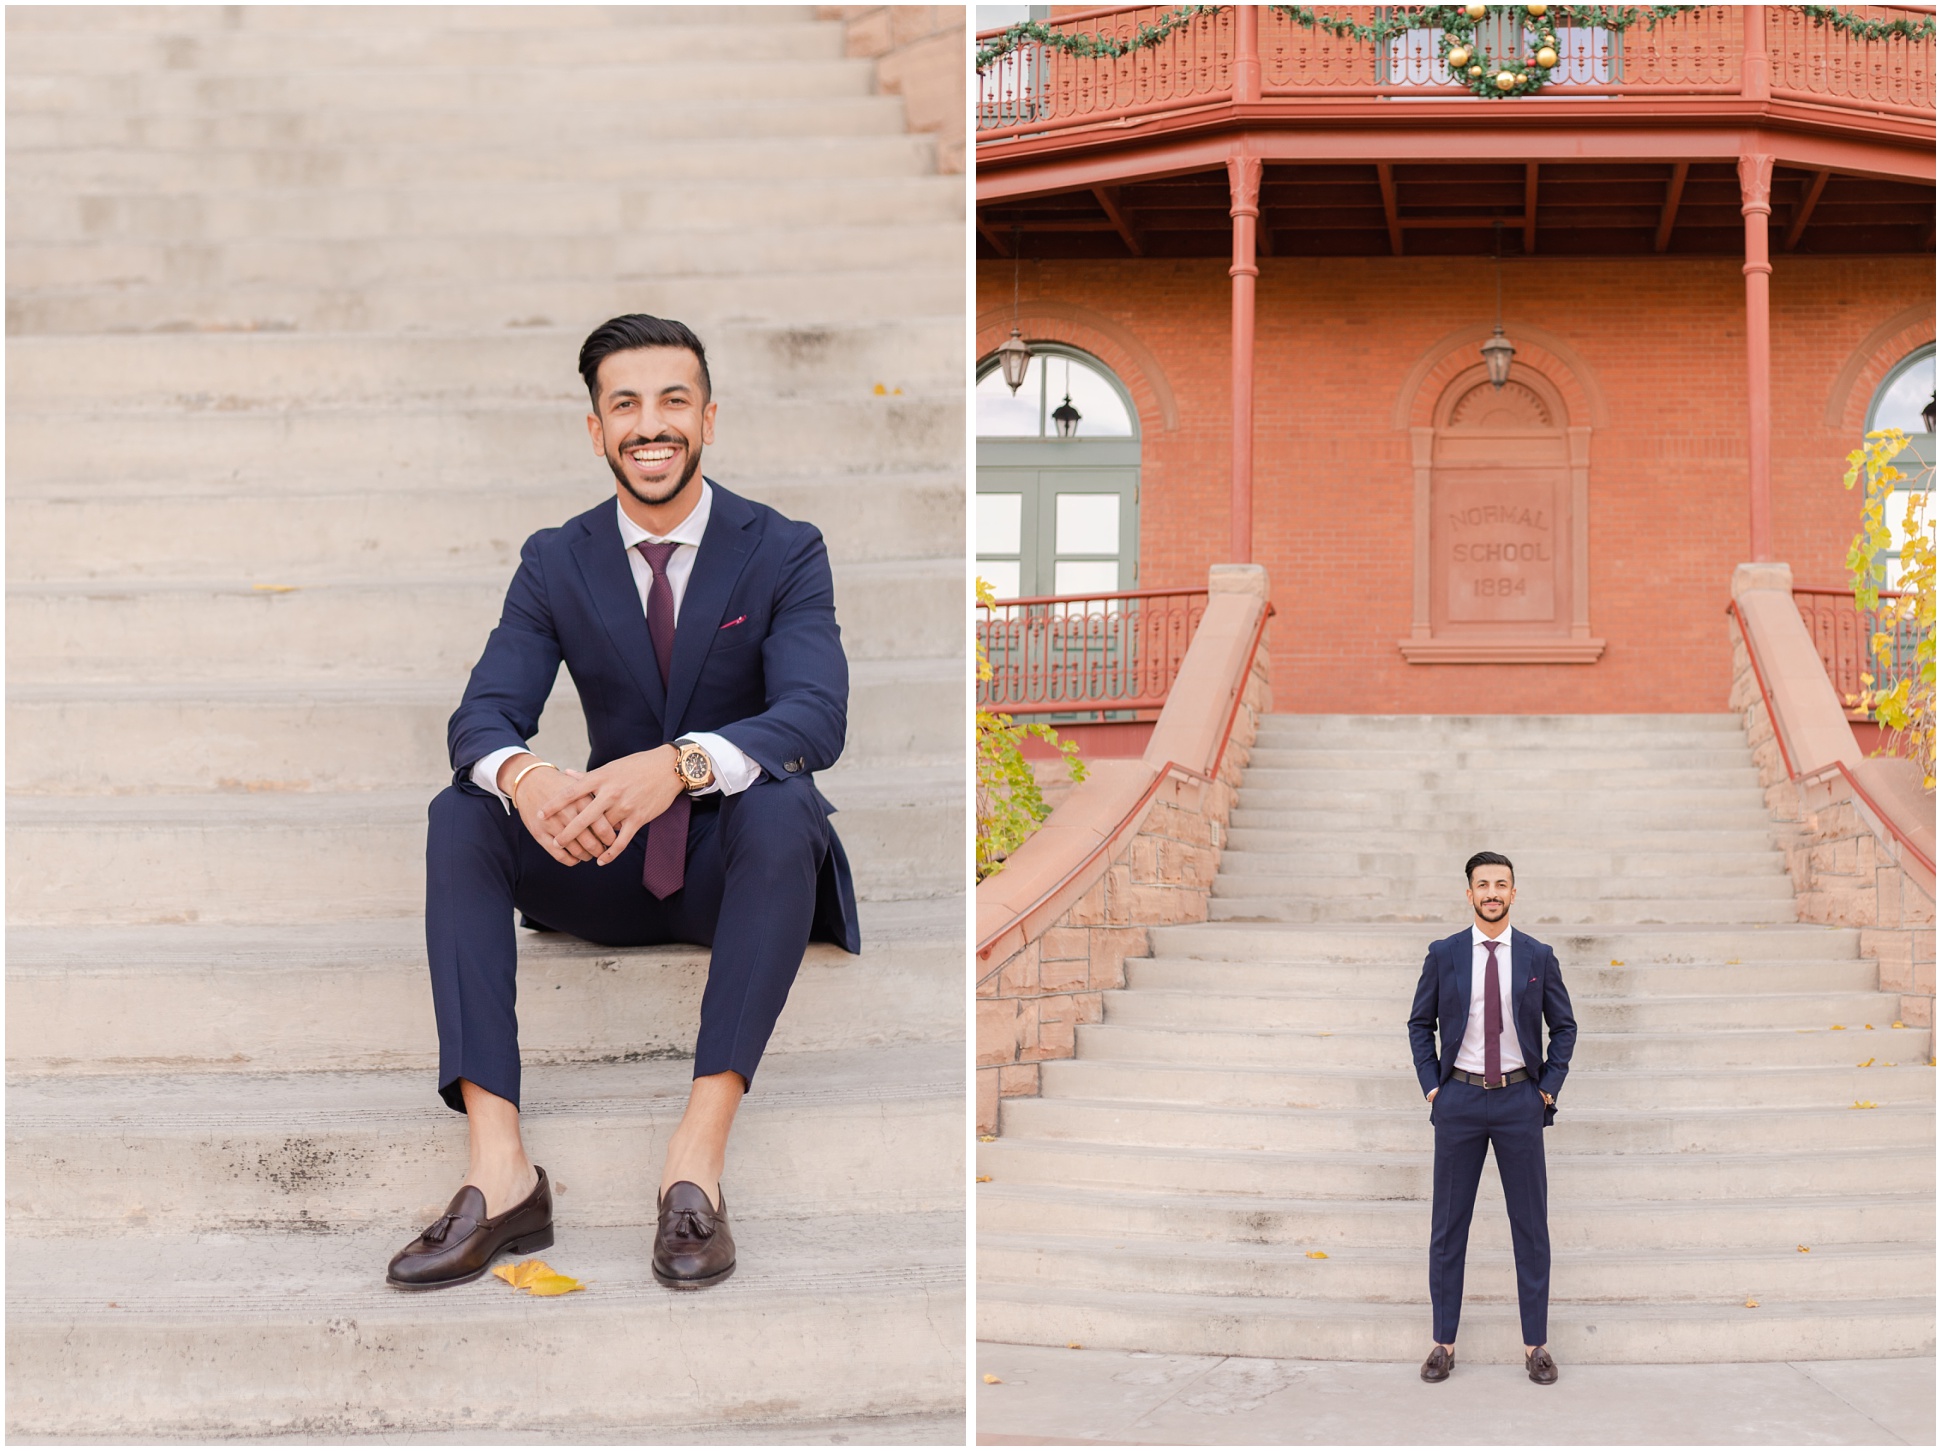 ASU graduate sitting on stairs and smiling at camera; ASU graduate standing in front of stairs connected to big red building